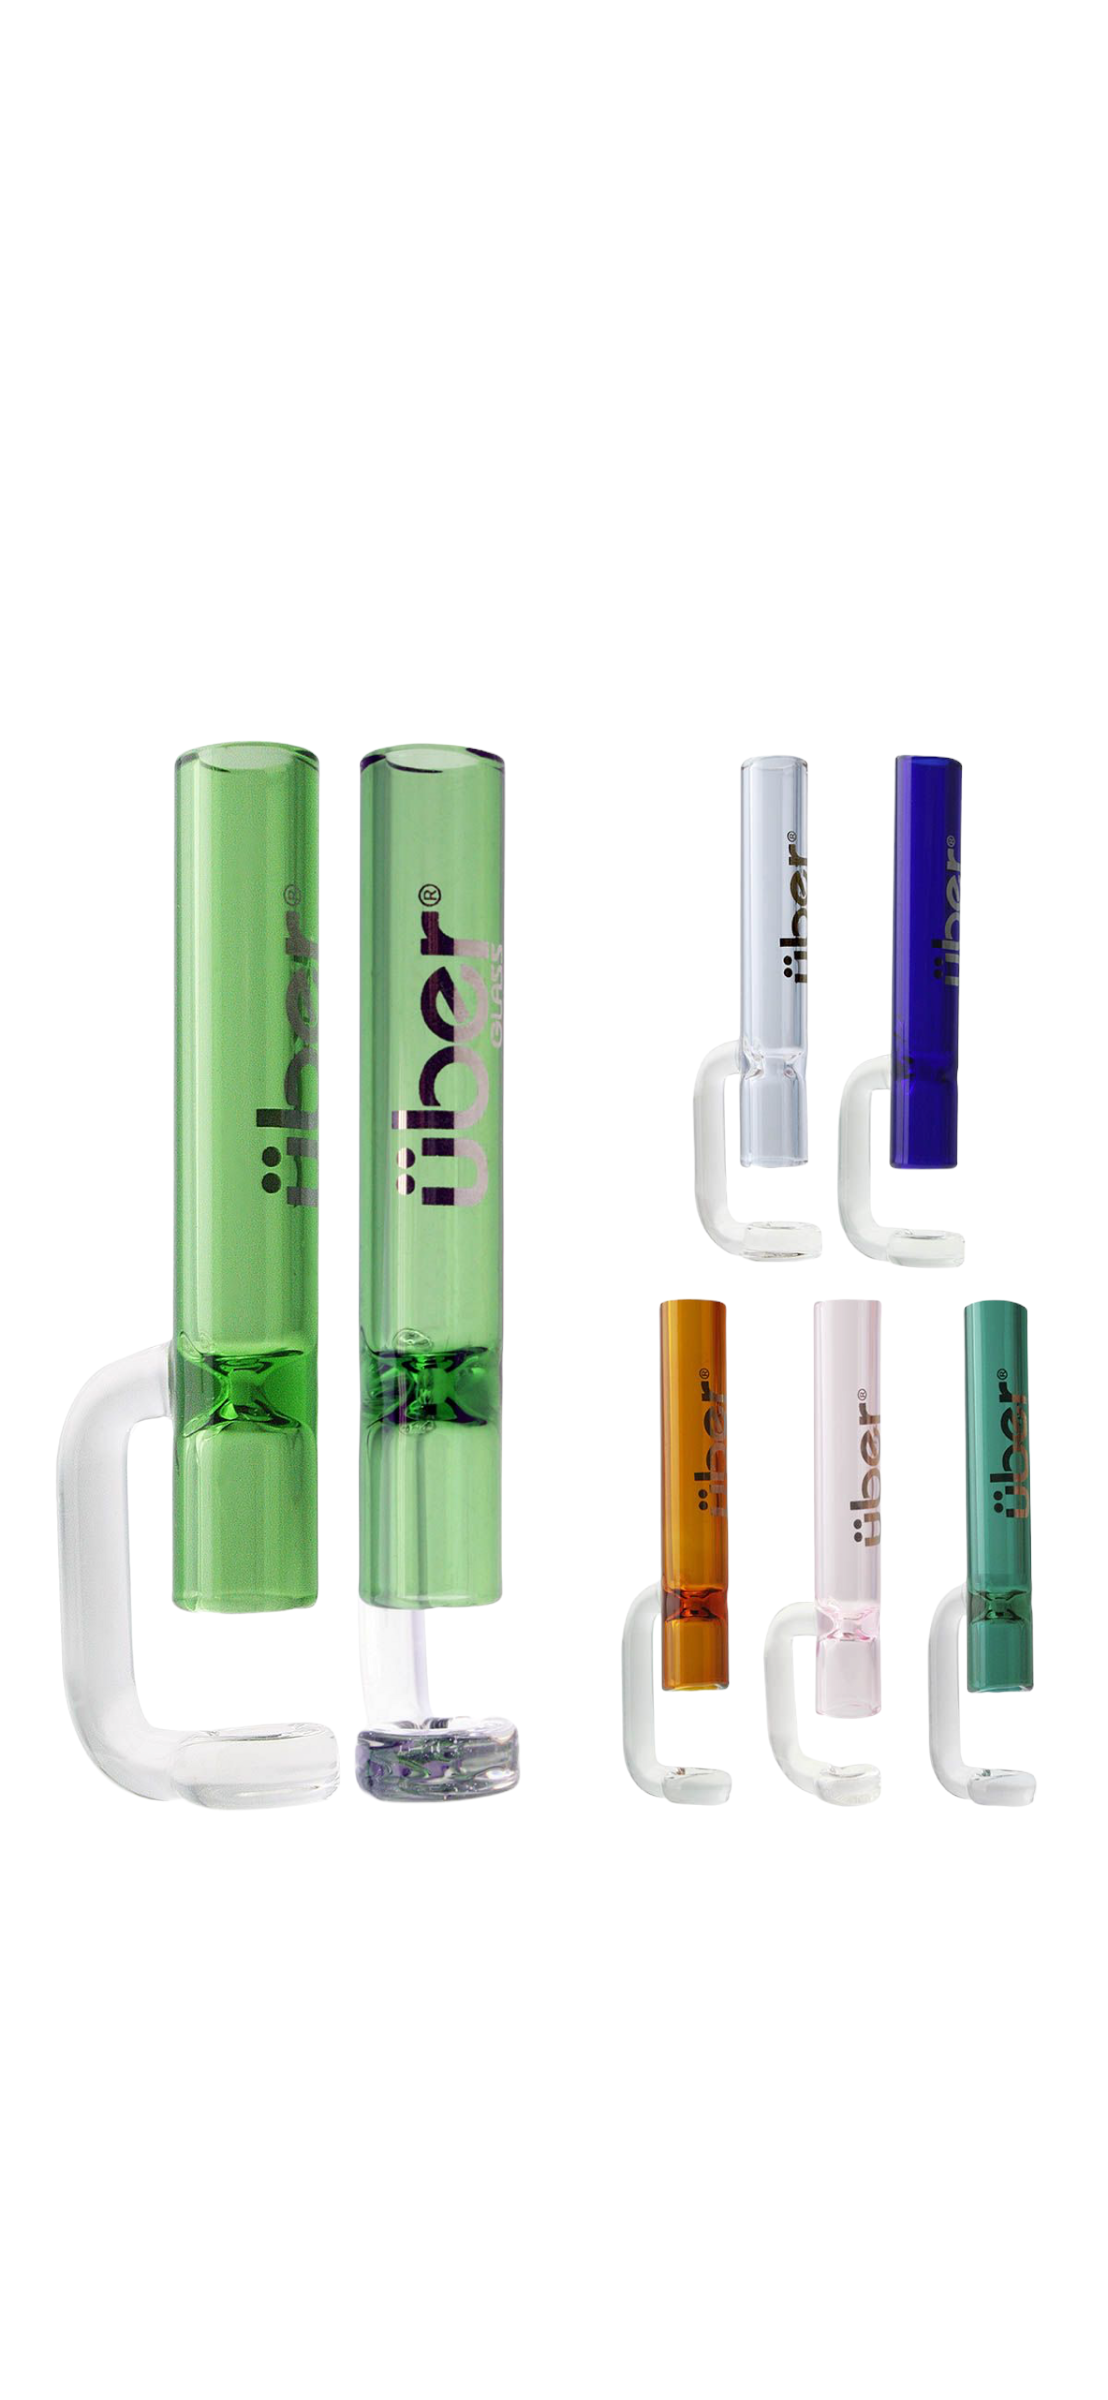 UBER GLASS | 3" CONCENTRATE CHILLUM TASTER | ASSORTED COLORS